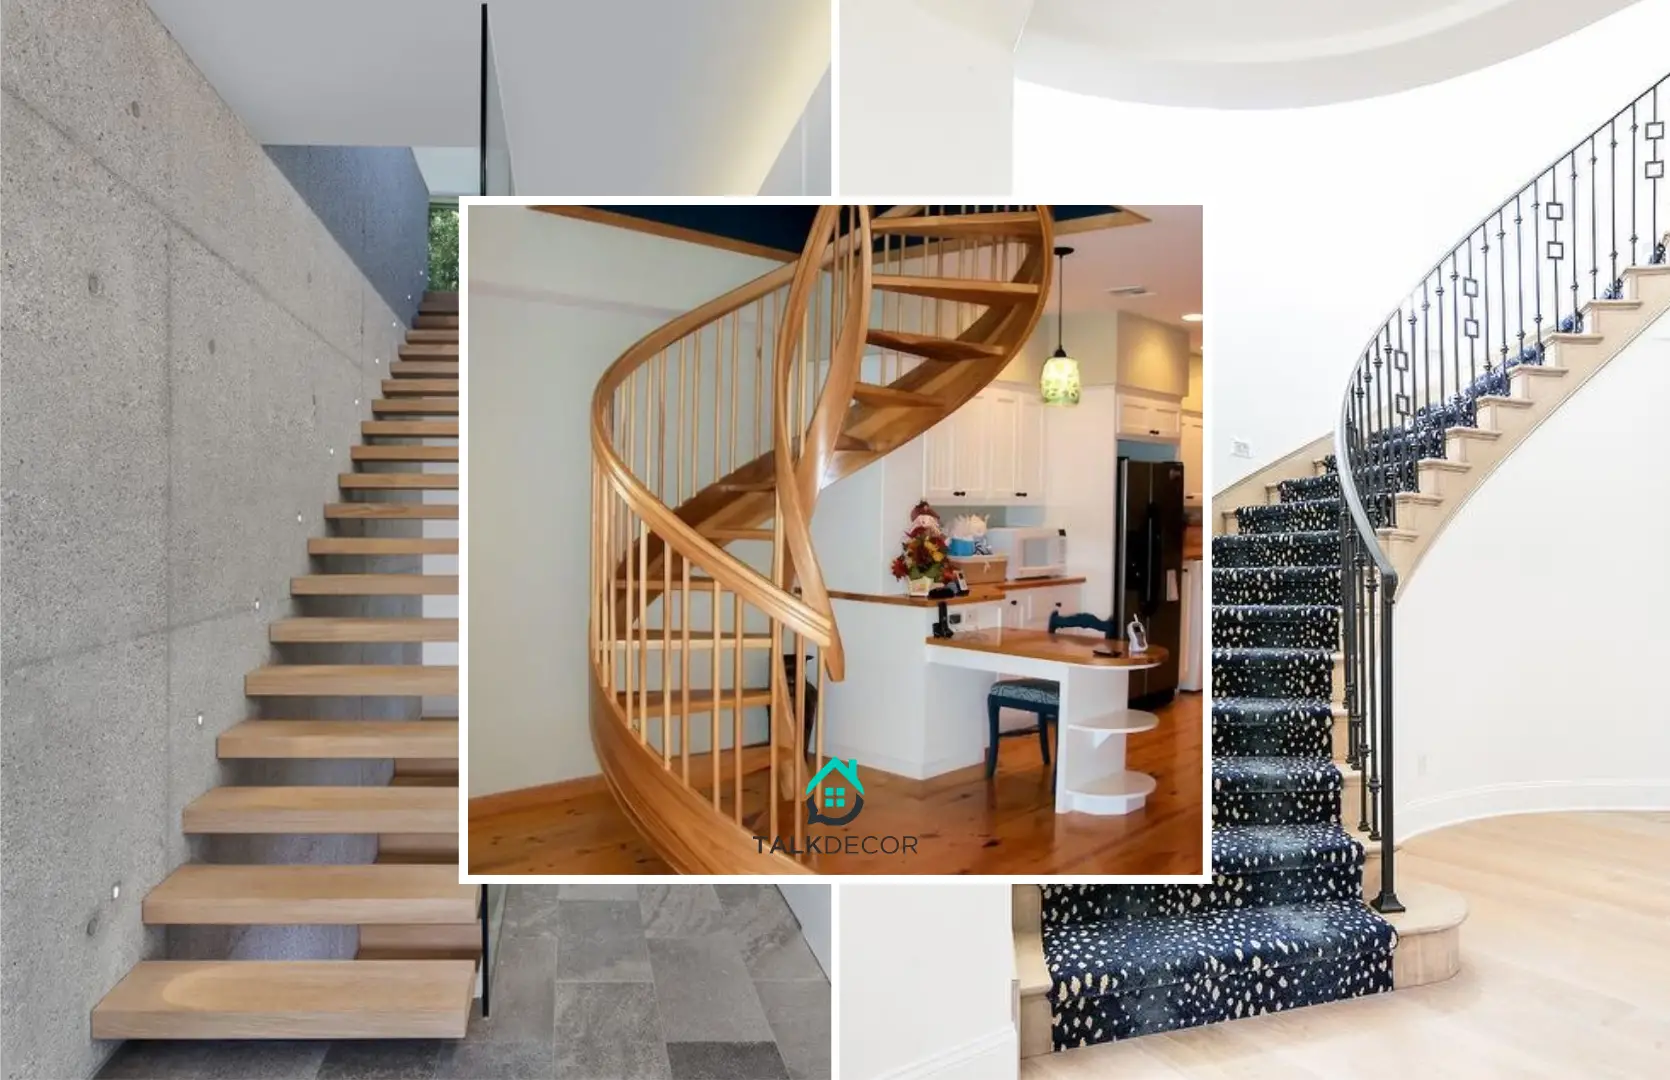 Superlative Staircases Ideas To Try On Your Lovely Home For Great Visual Appeal